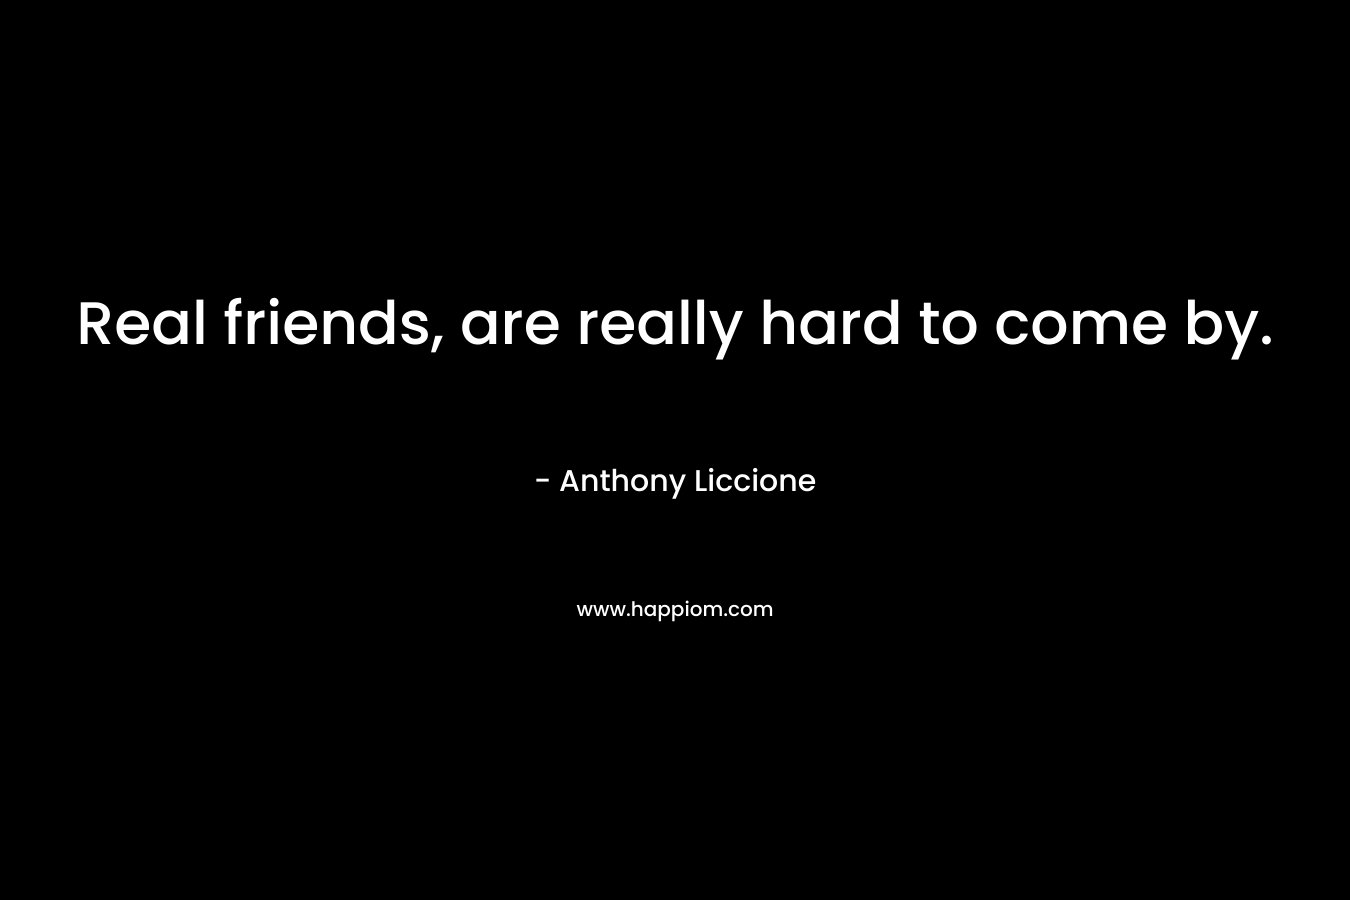 Real friends, are really hard to come by. – Anthony Liccione